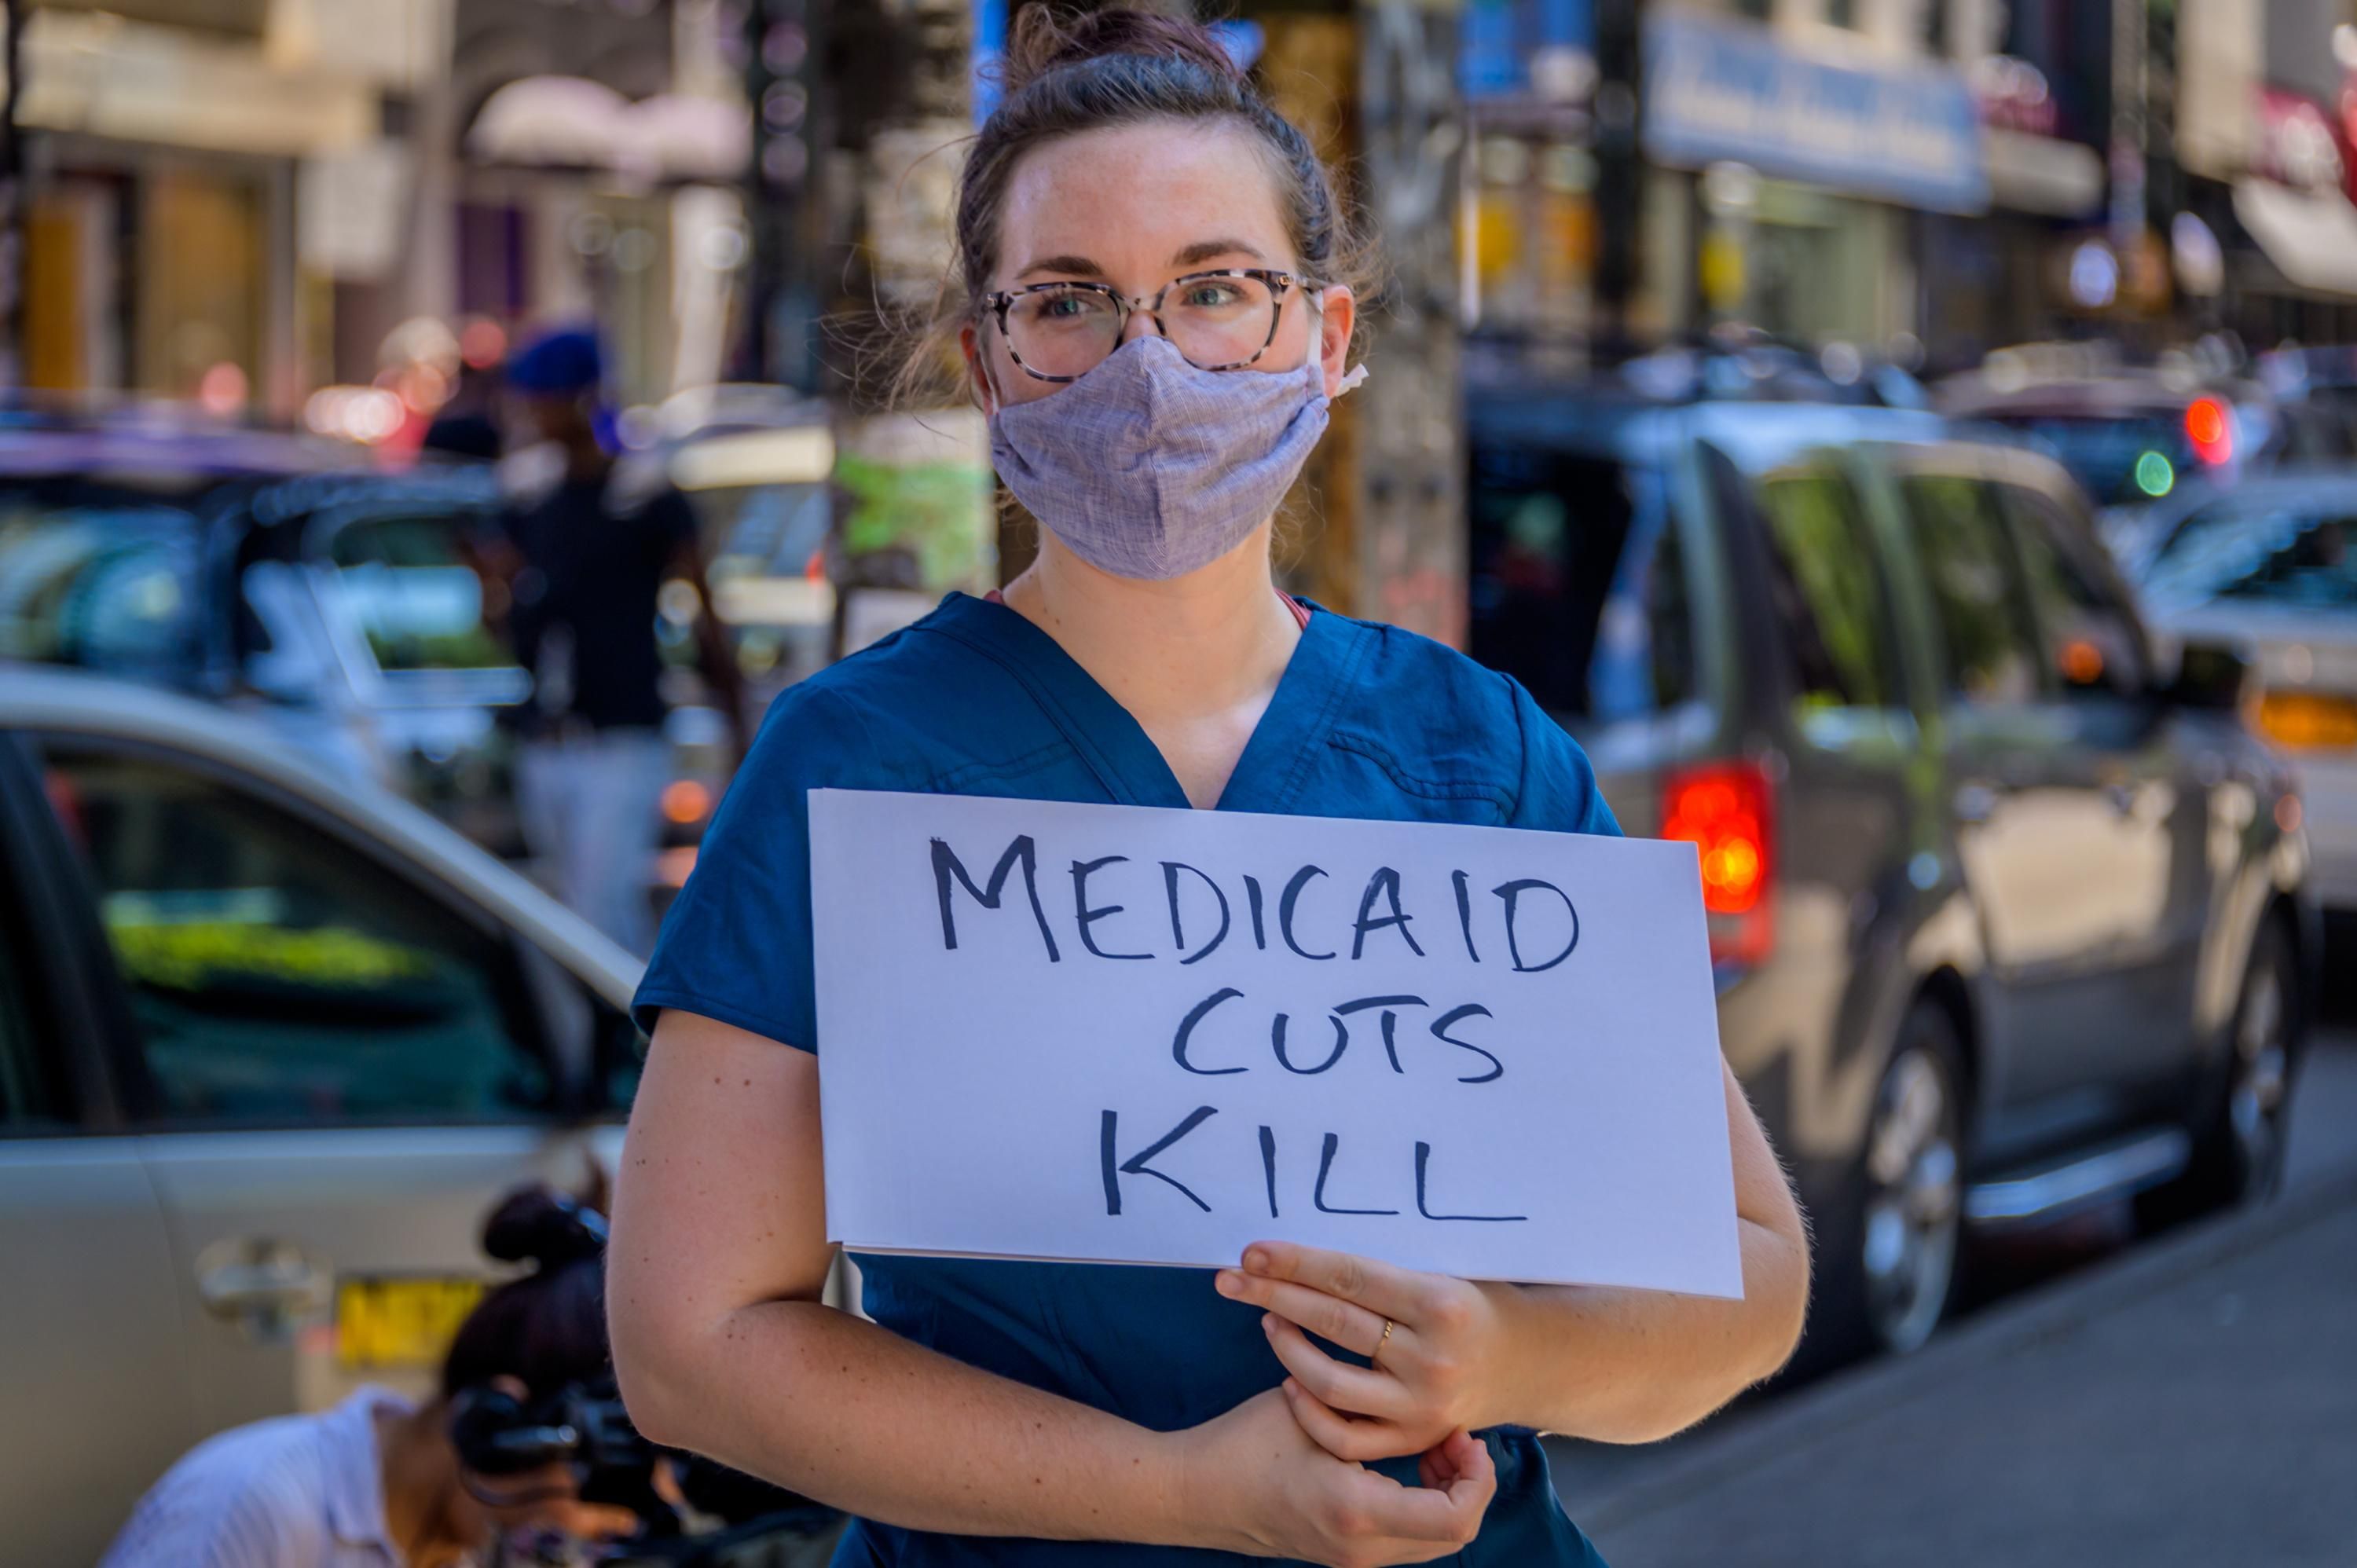 A demonstrator holds a "Medicaid Cuts Kill" sign at a rally